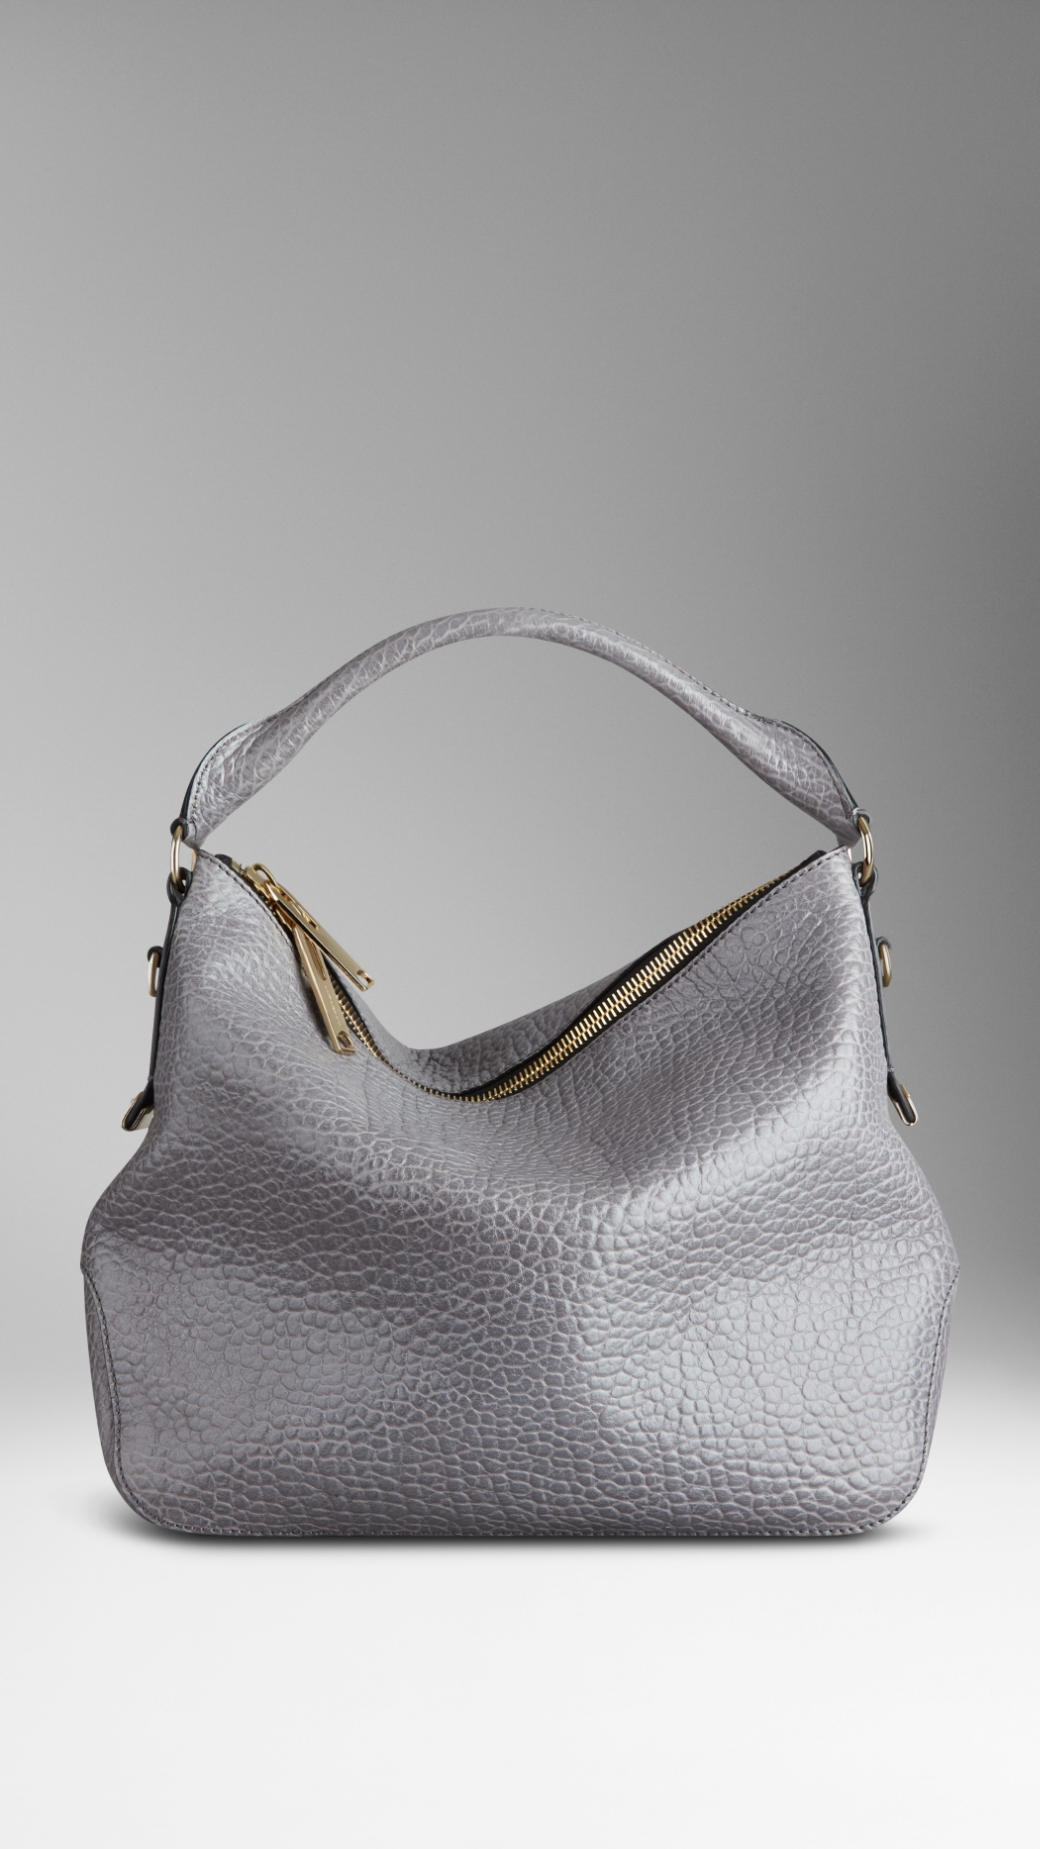 Burberry Small Heritage Grain Leather Hobo Bag in Gray (mid grey melange) | Lyst